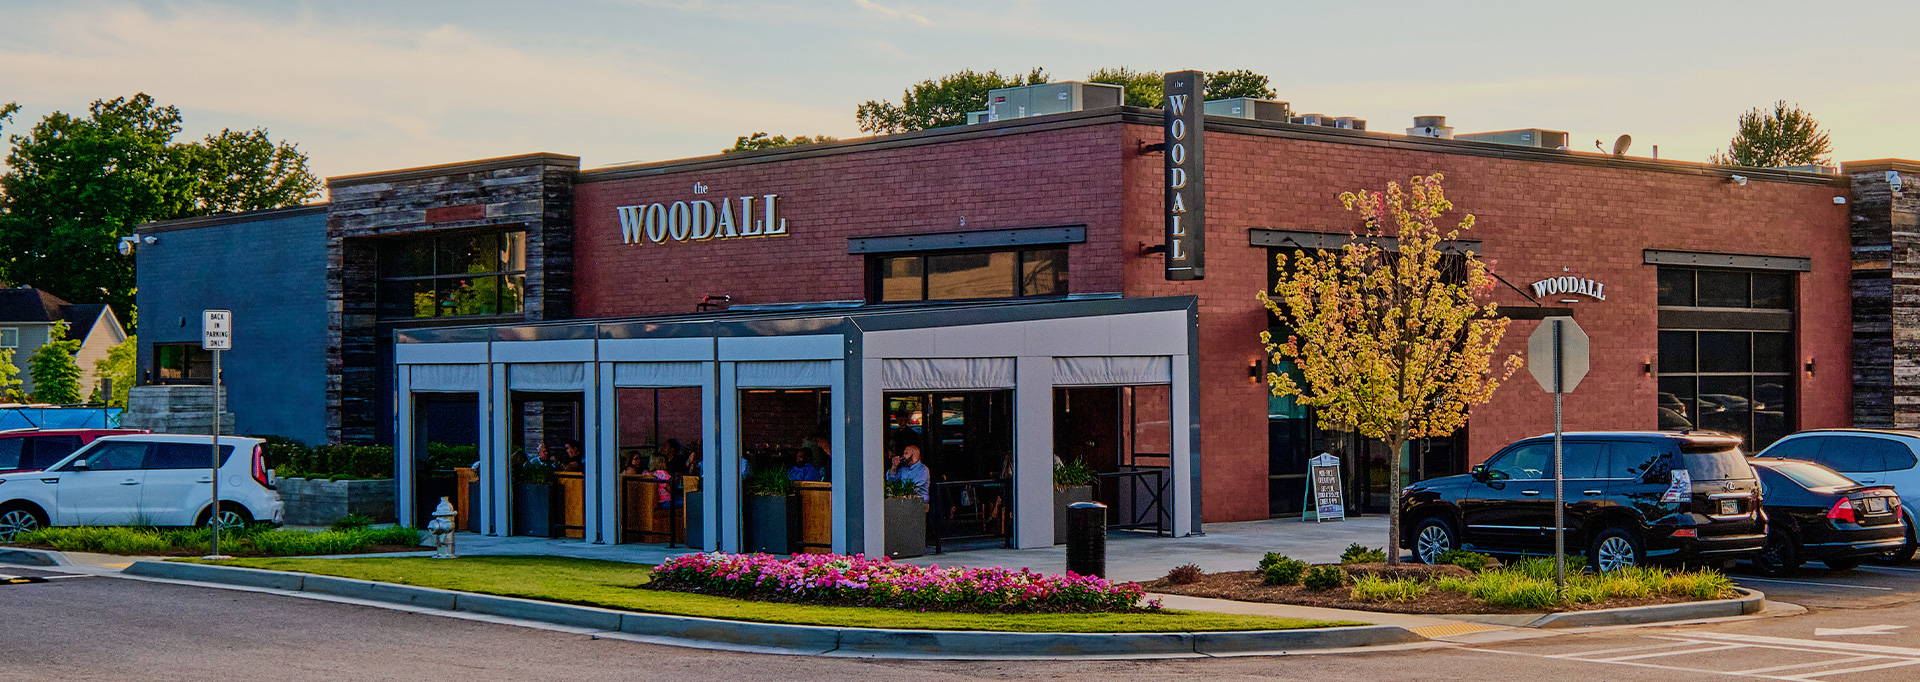 The Woodall Exterior